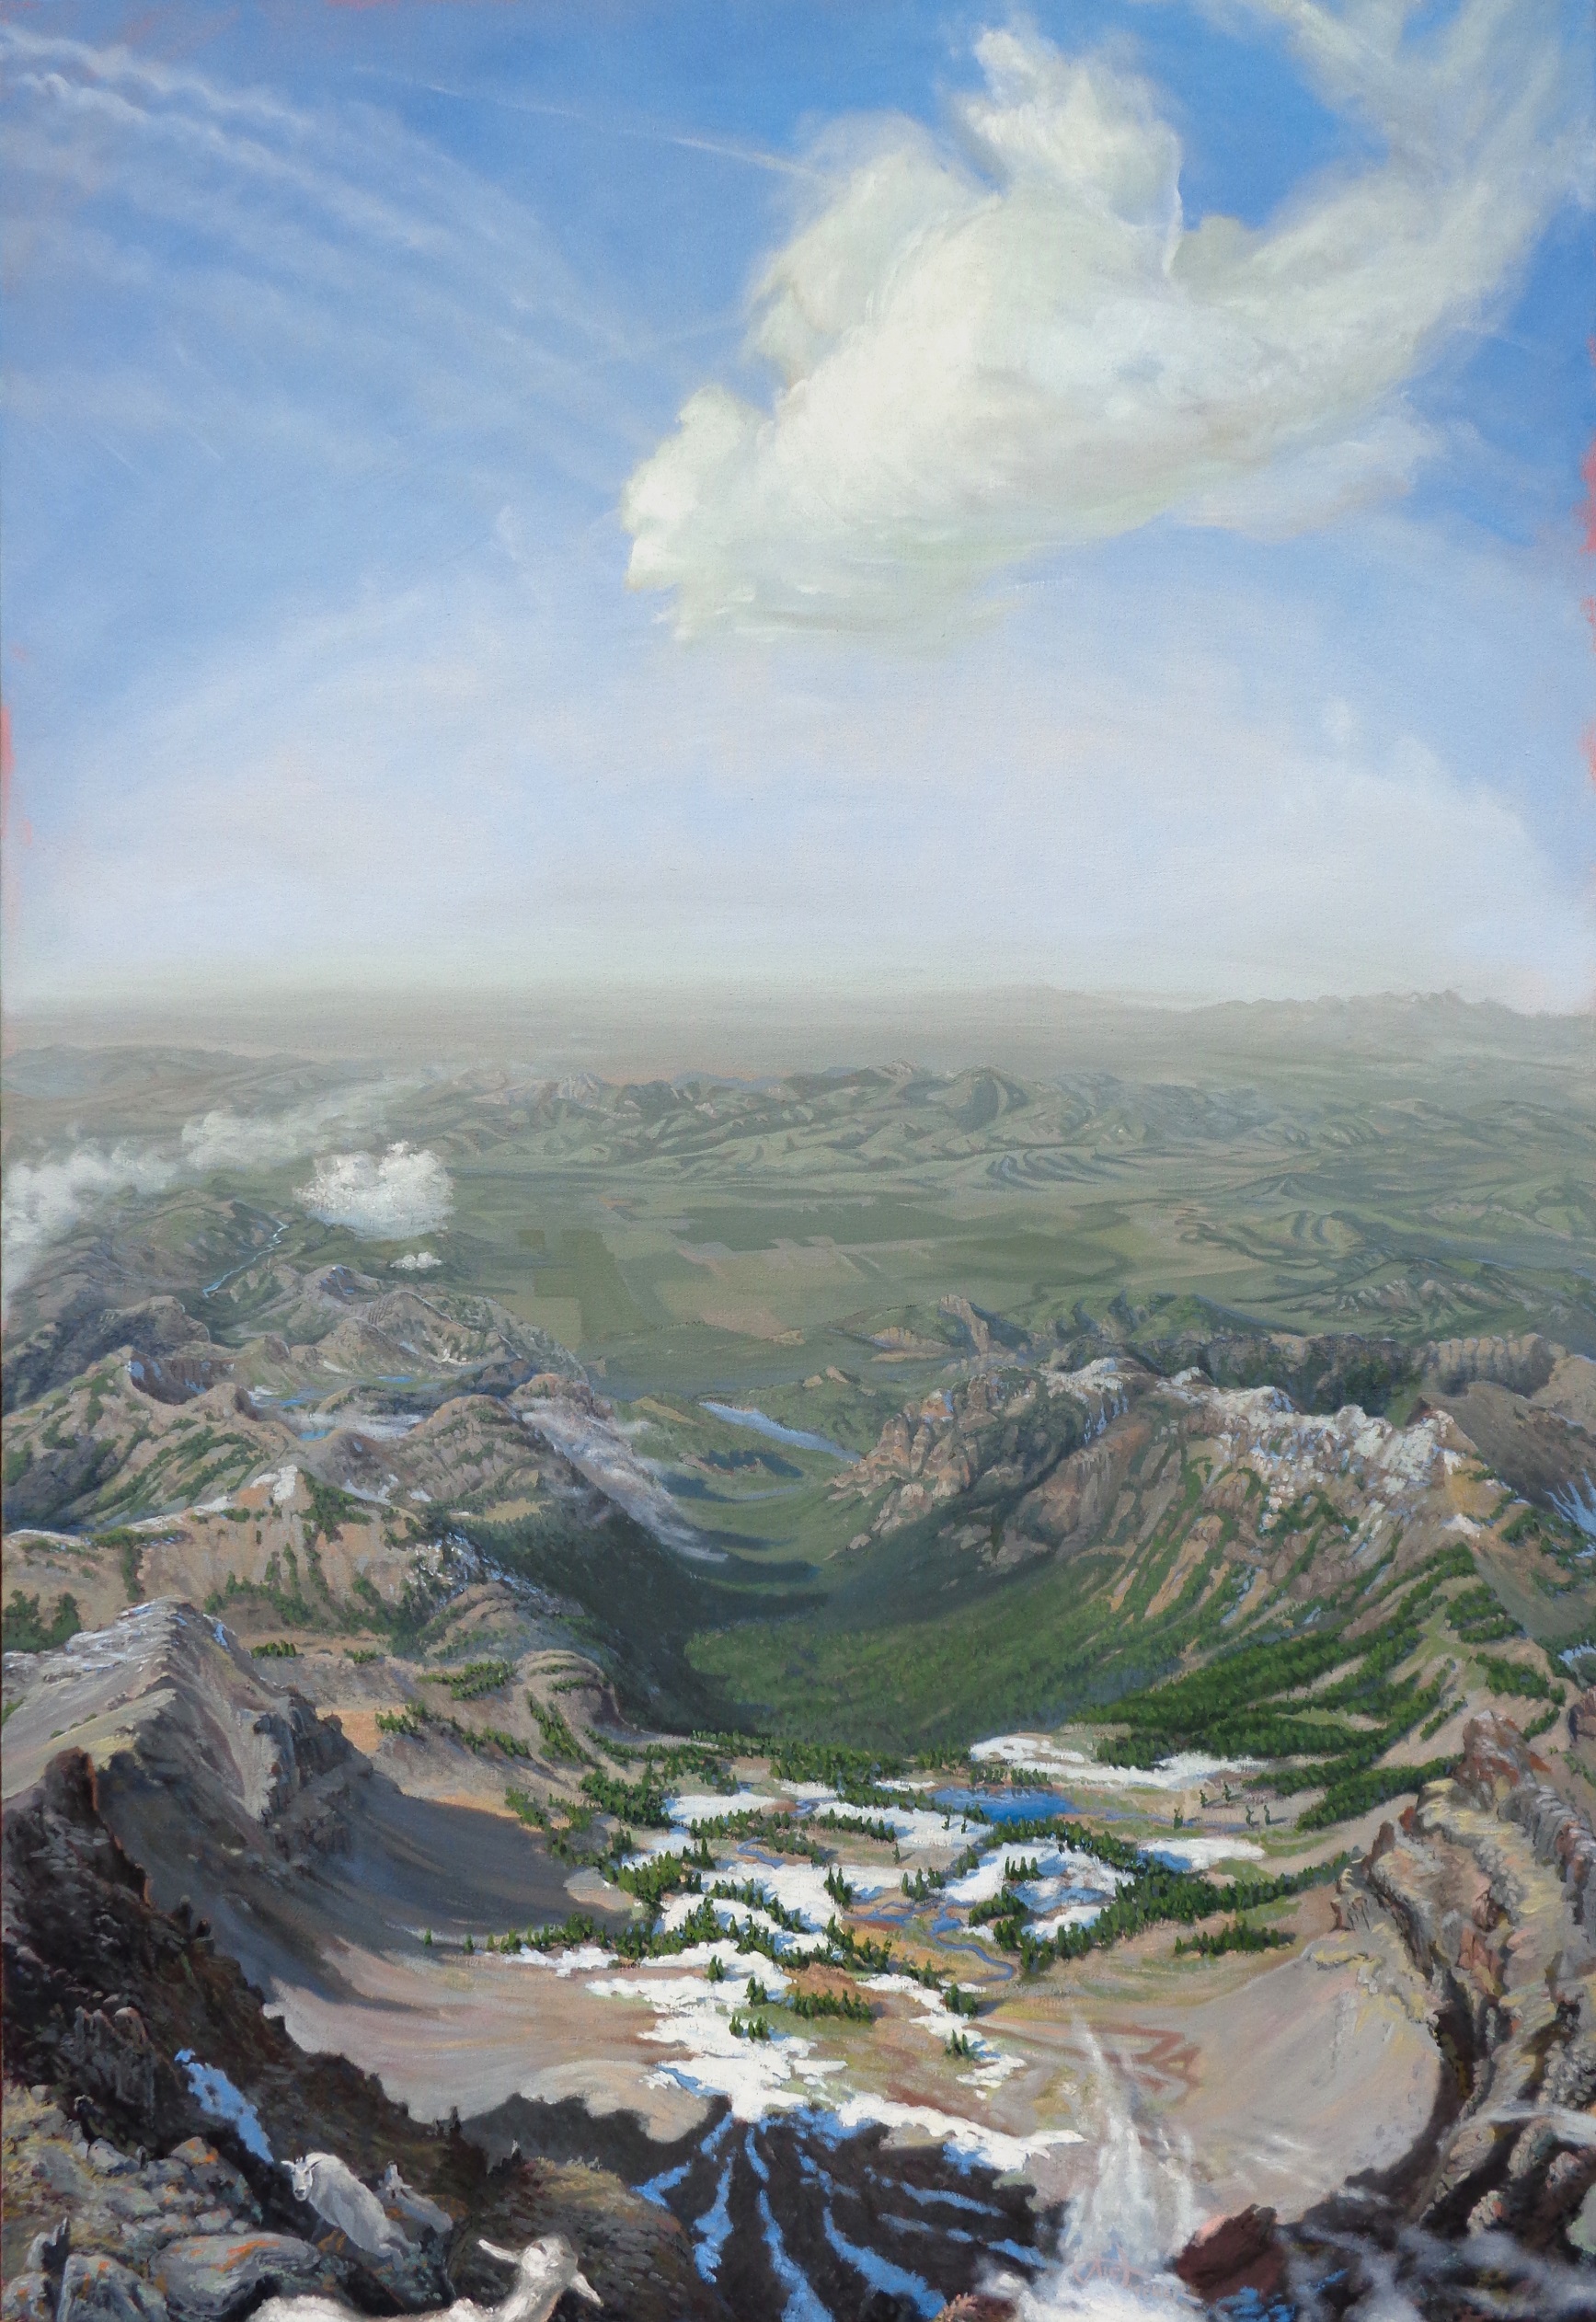 Landscape painting by Nic Fischer entitled "Hyalite," showing a view from on high of mountains, valleys, and clouds